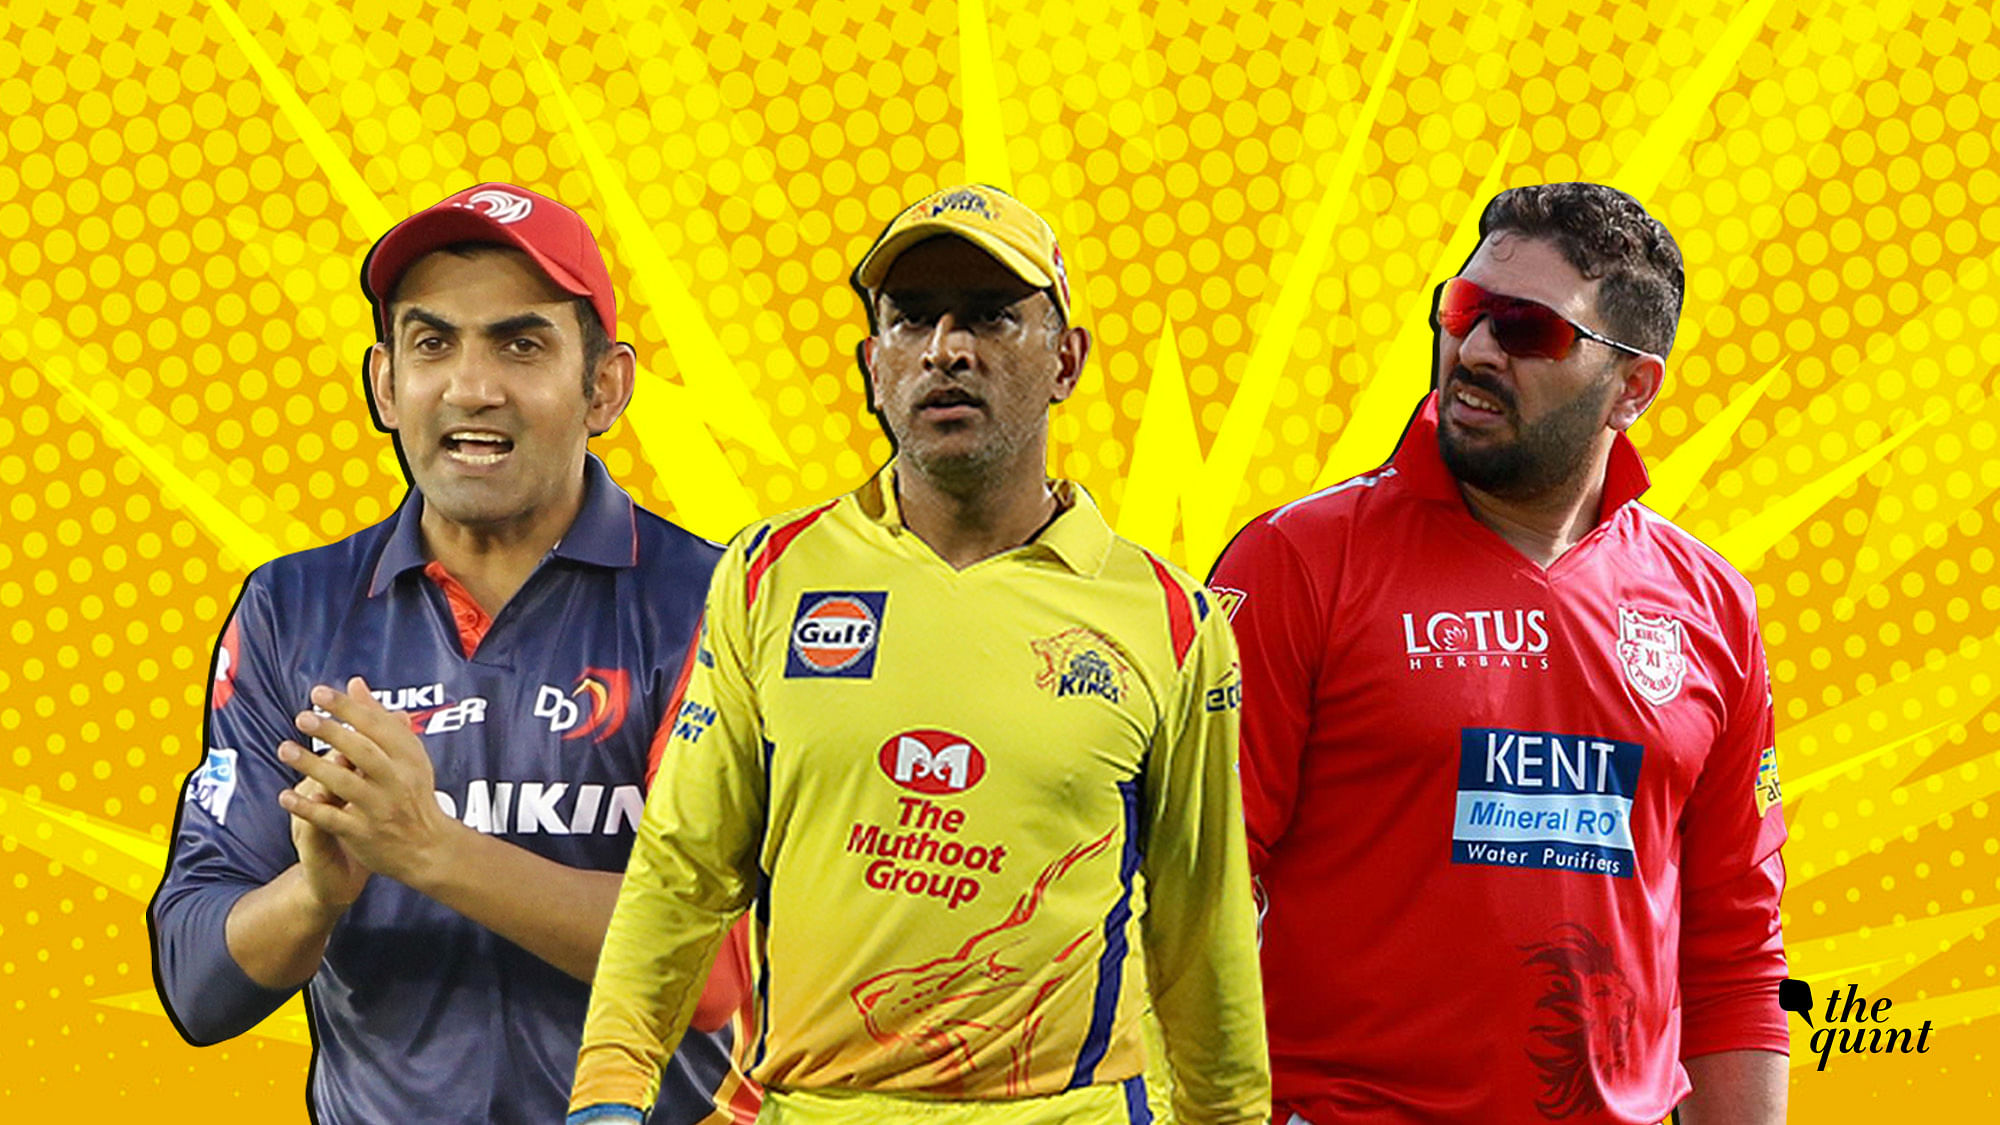 MS Dhoni has retained almost his entire Chennai Super Kings squad while stalwarts Gautam Gambhir and Yuvraj Singh have been released by Delhi and Punjab.